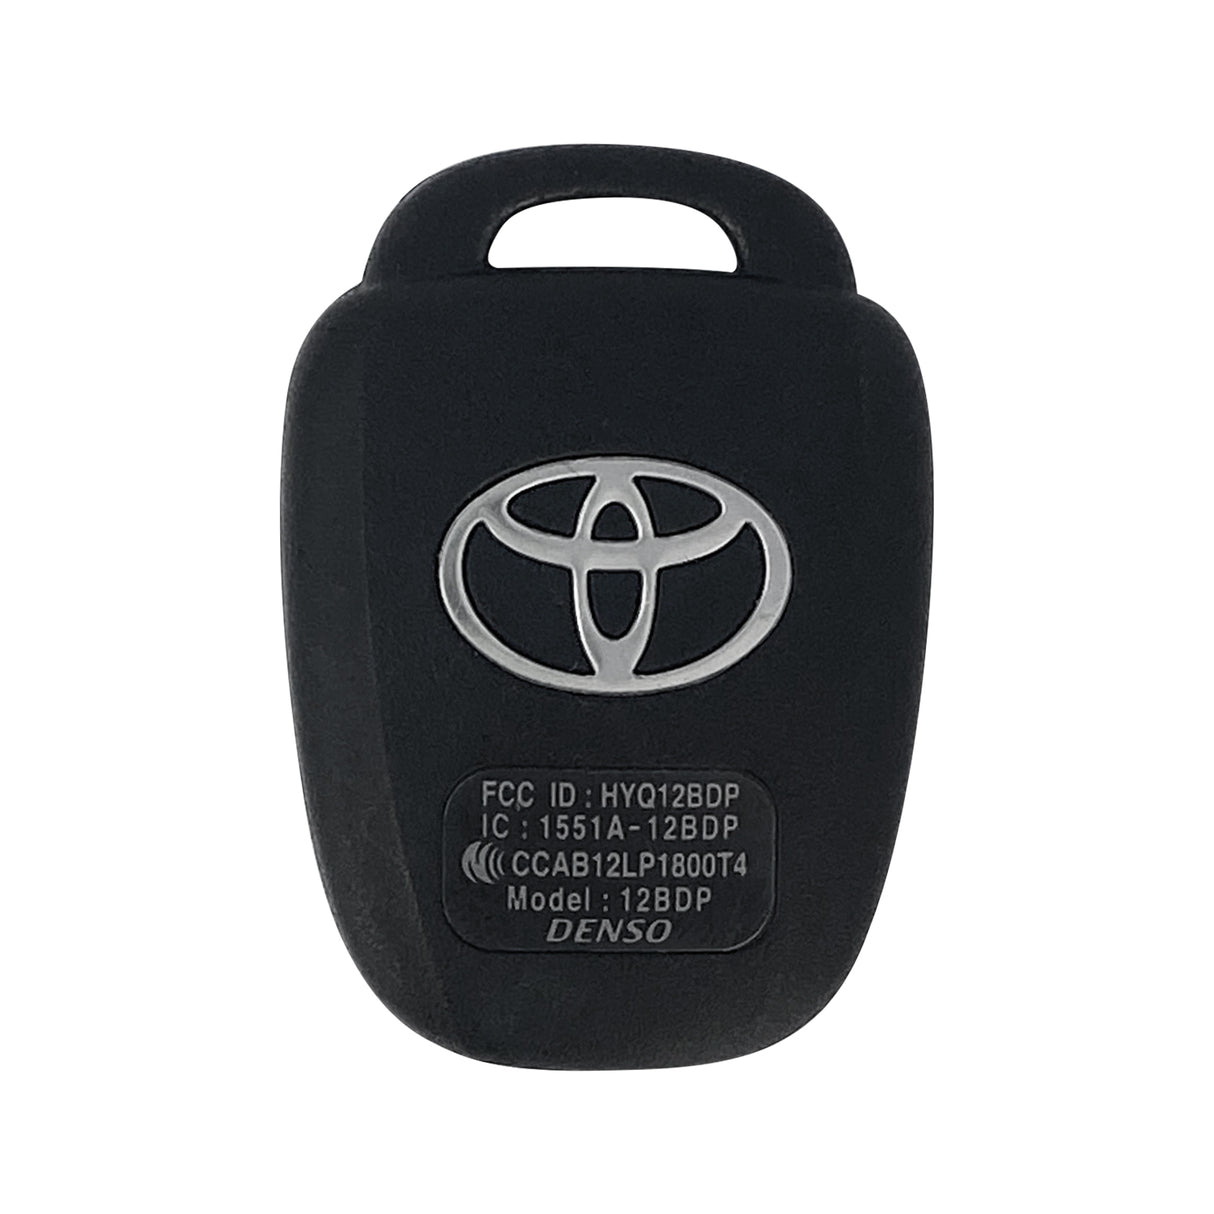 SHELL Toyota RHK Back Cover for HYQ12BDP w/ Sticker